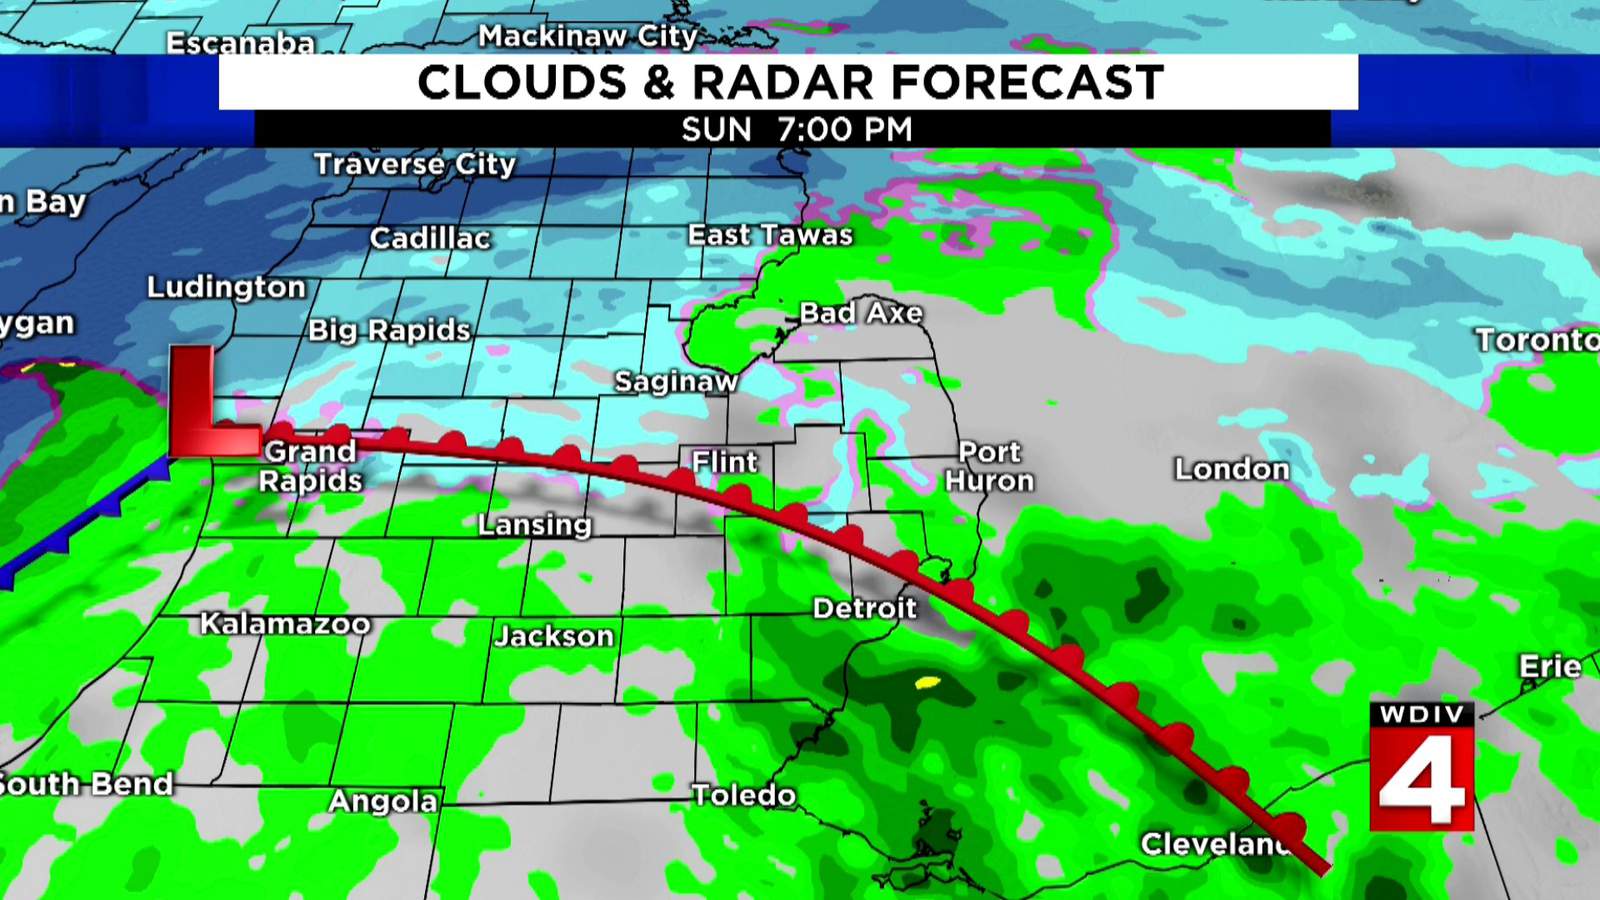 Metro Detroit weather: Cloudy weather in the forecast until Tuesday